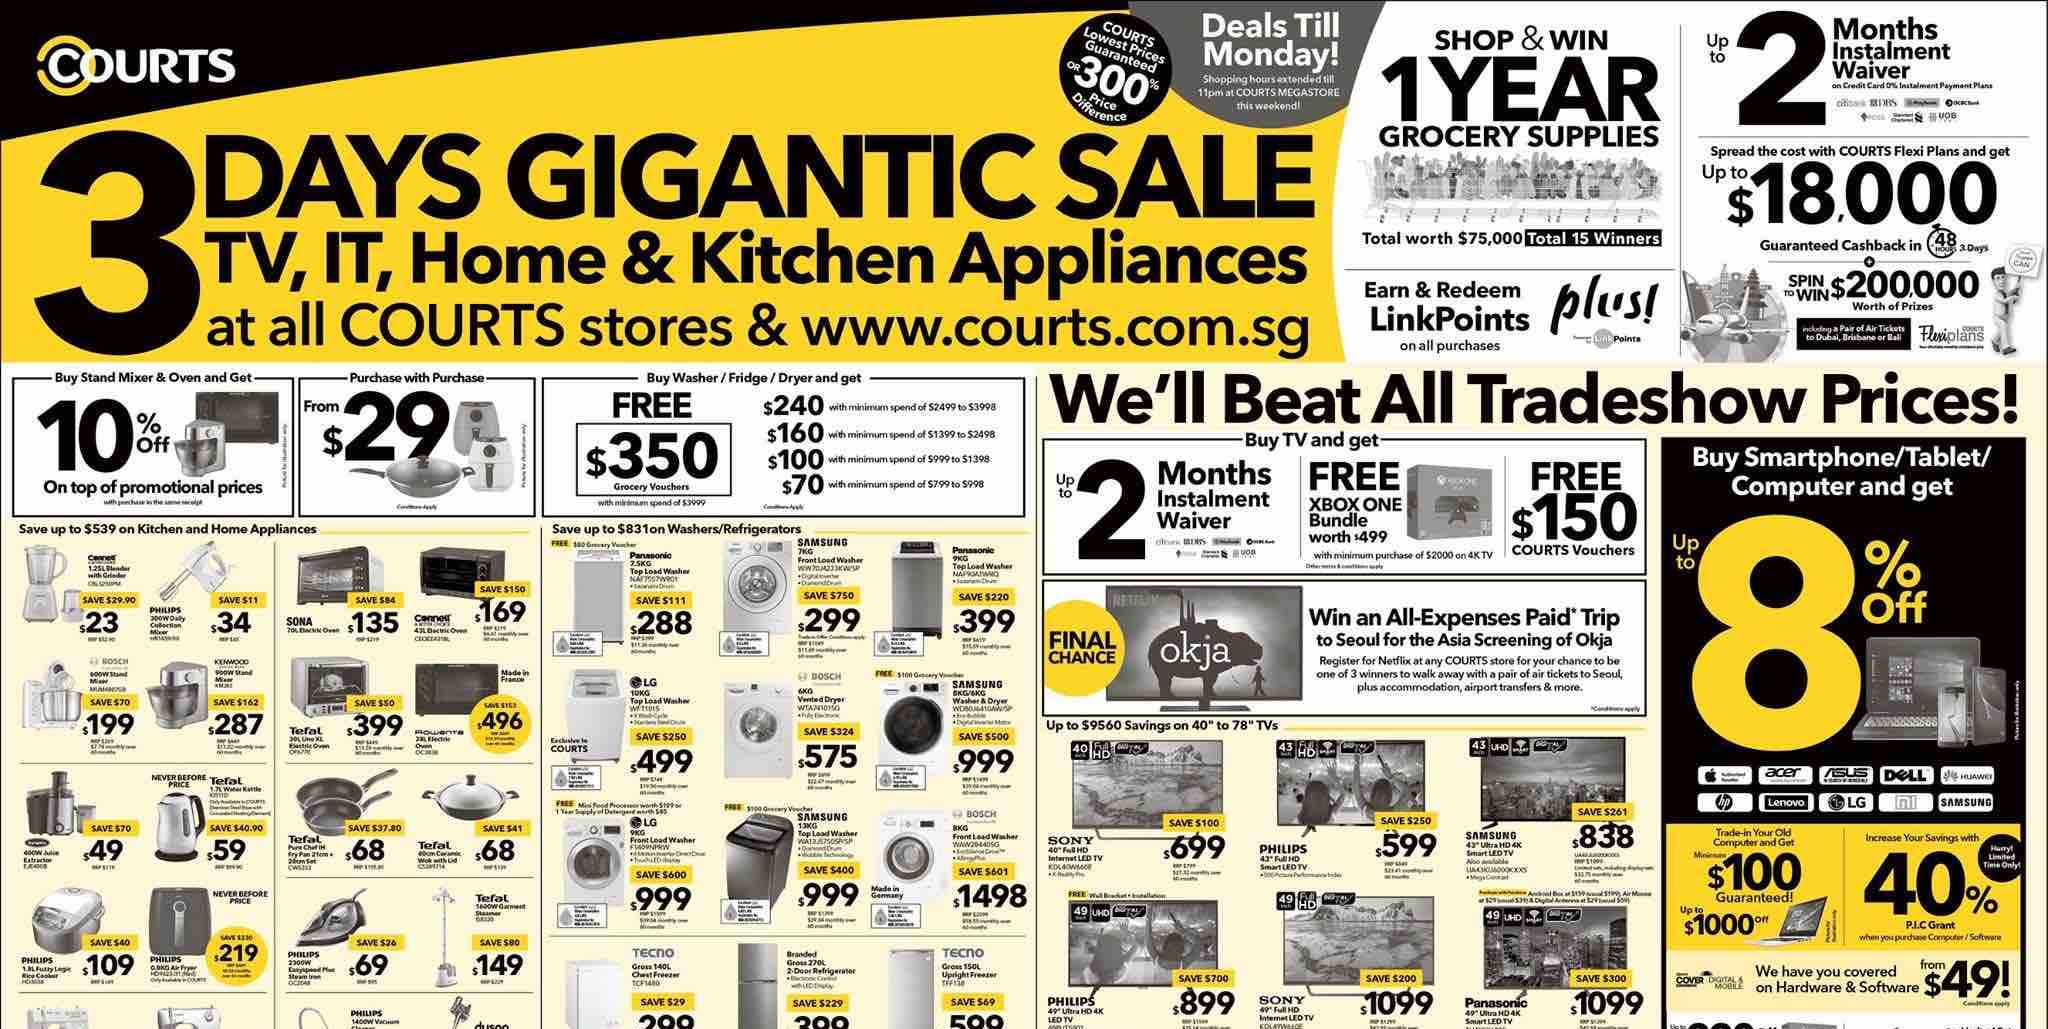 COURTS SG 3 Days Gigantic Sale That Beats All Tradeshow Prices Promotion 3-5 Jun 2017